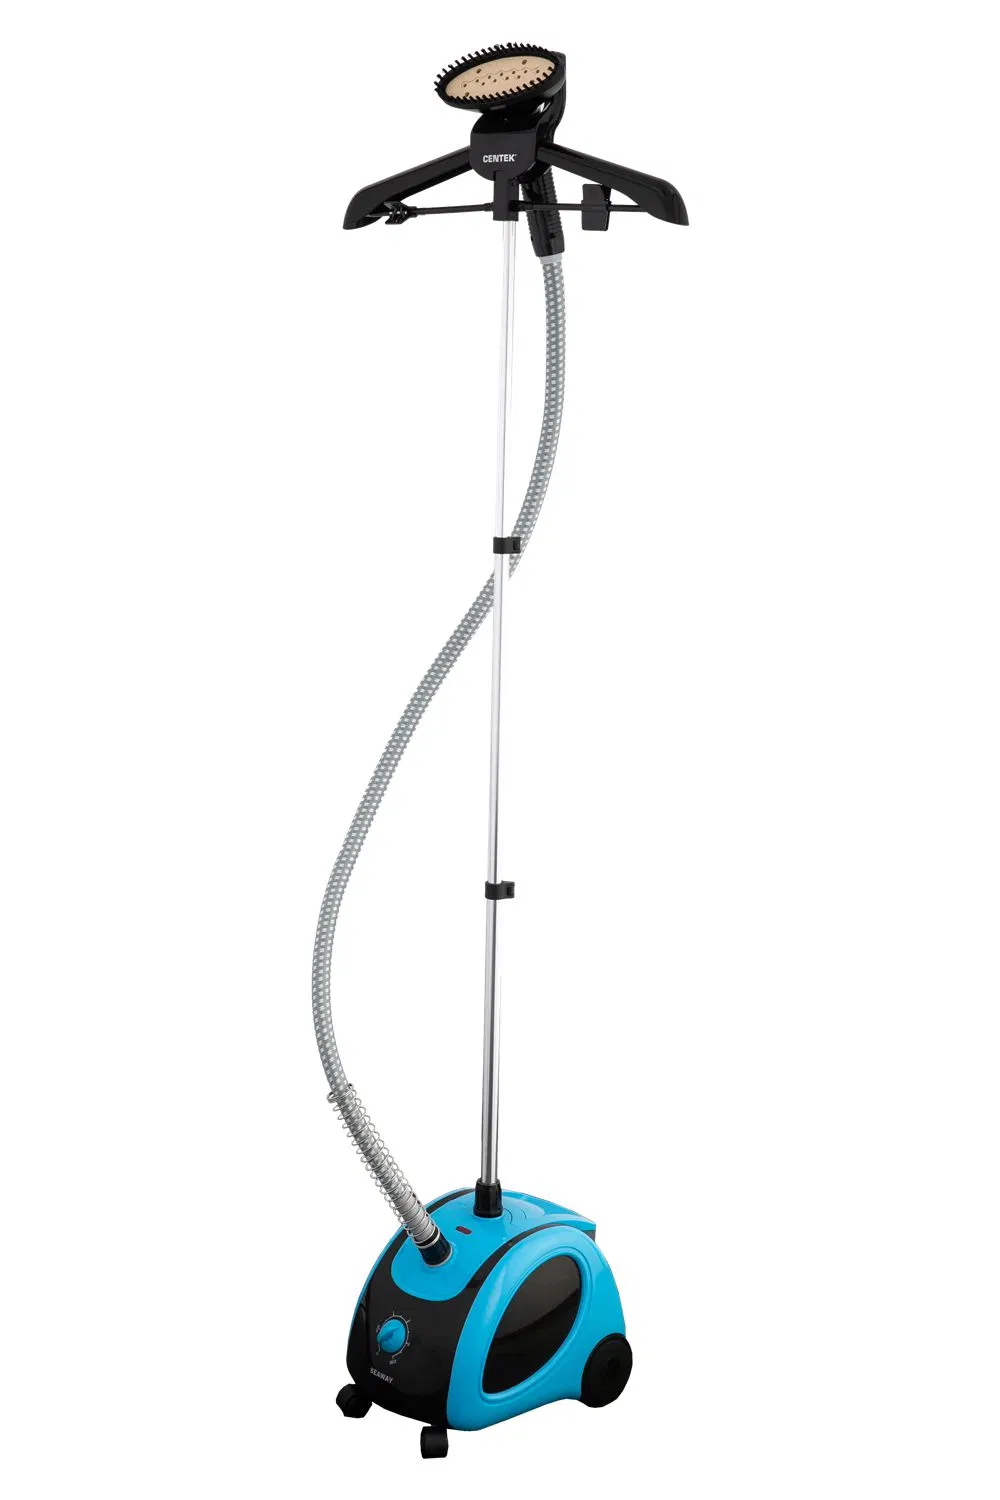 Telescopic Design for Compact Storage Stand Garment Steamer